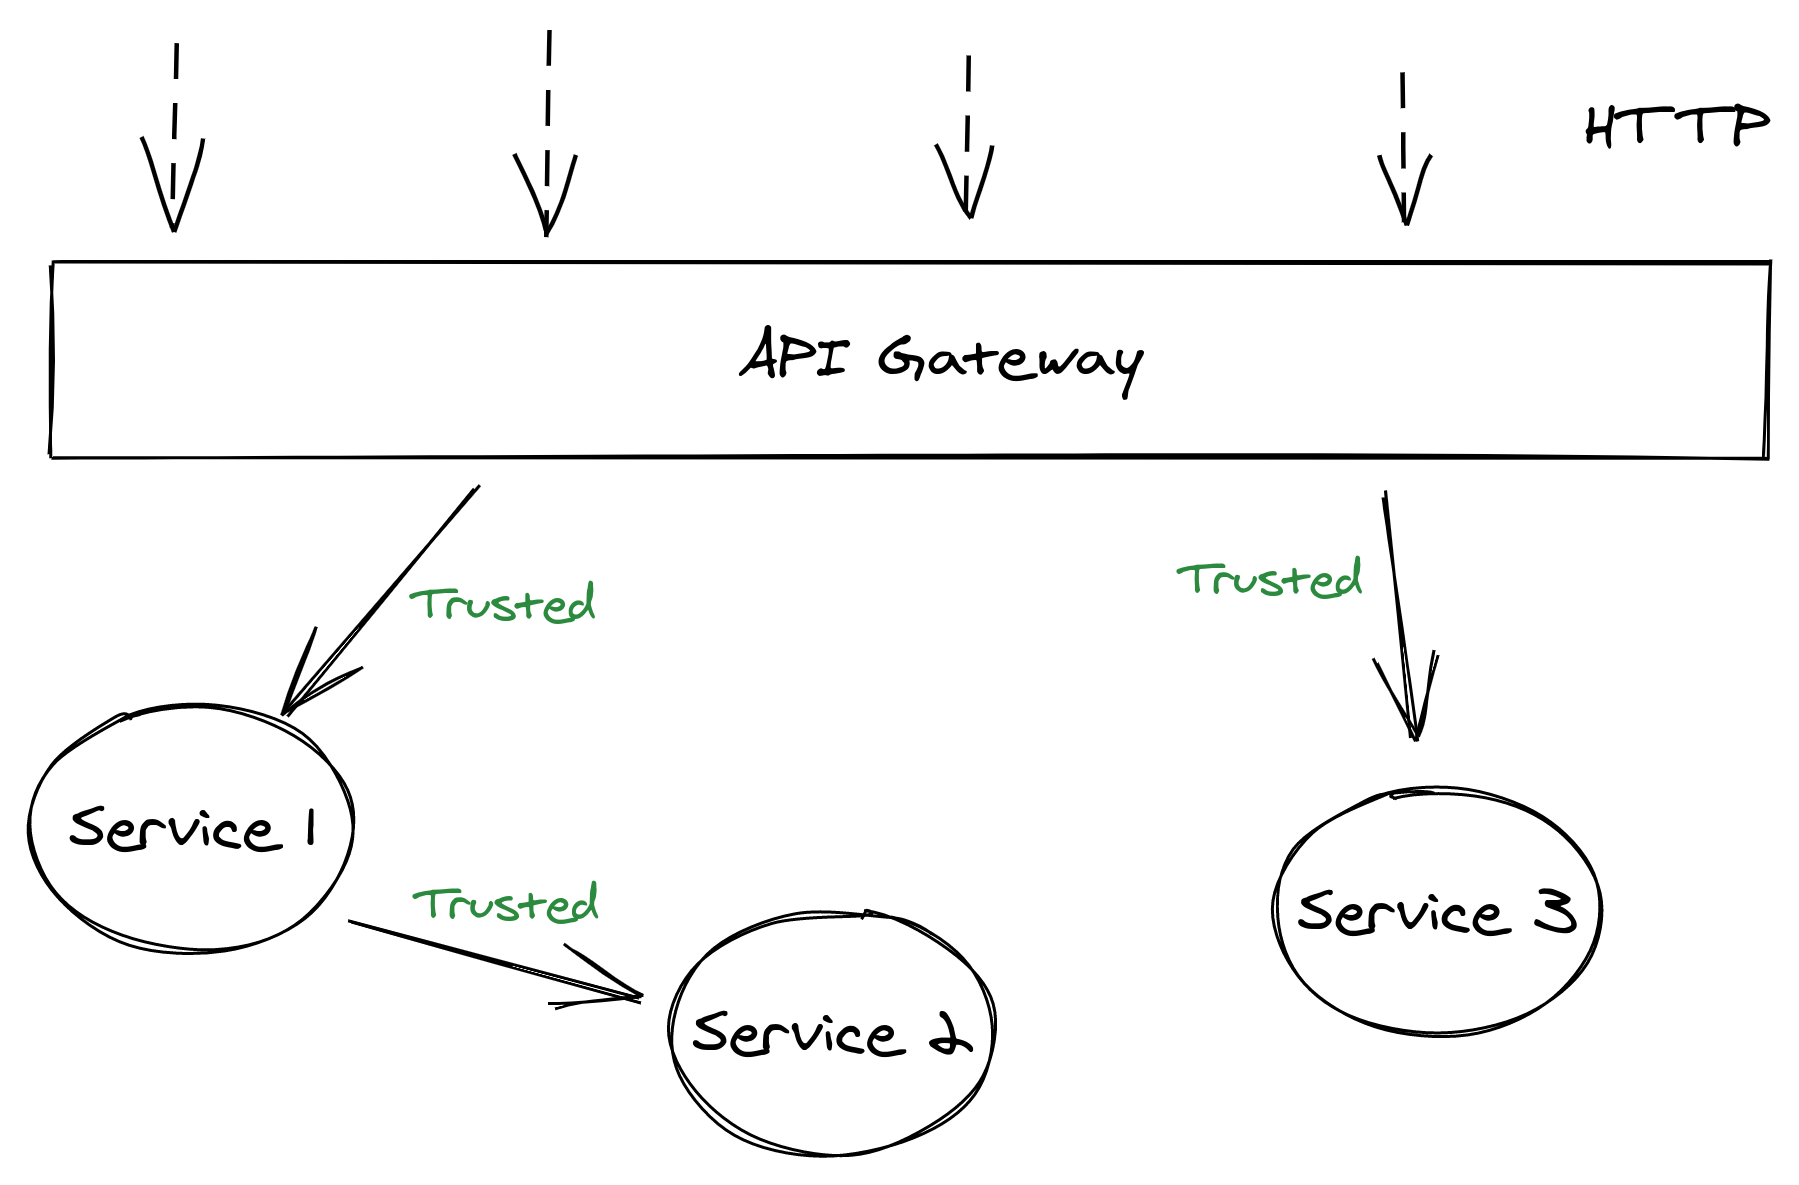 API gateway authenticating HTTP requests up front